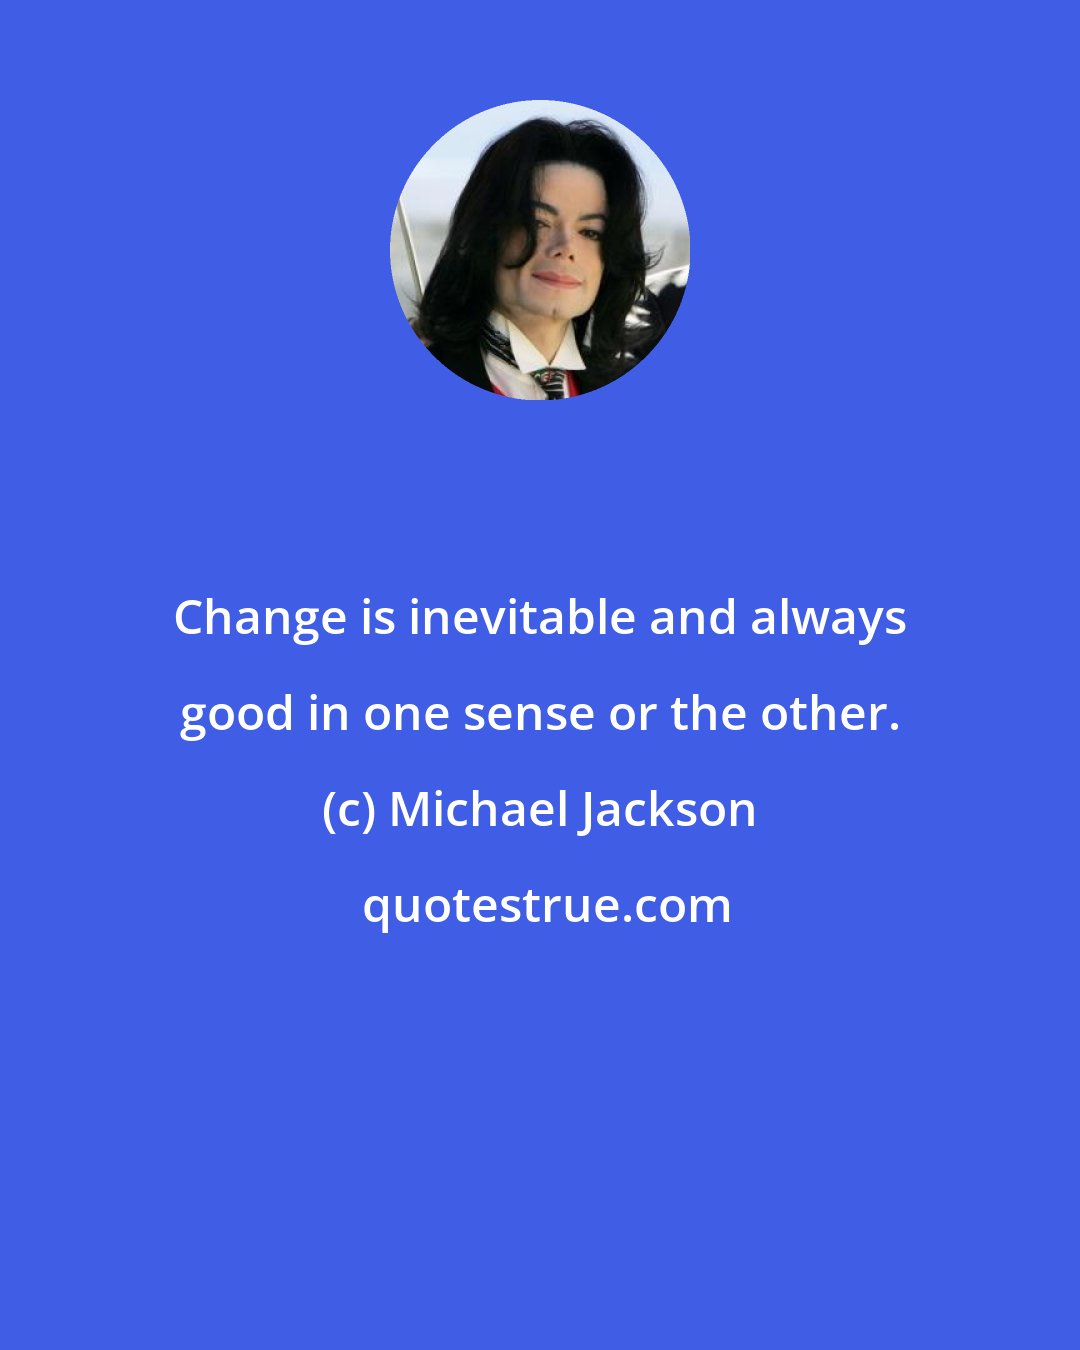 Michael Jackson: Change is inevitable and always good in one sense or the other.